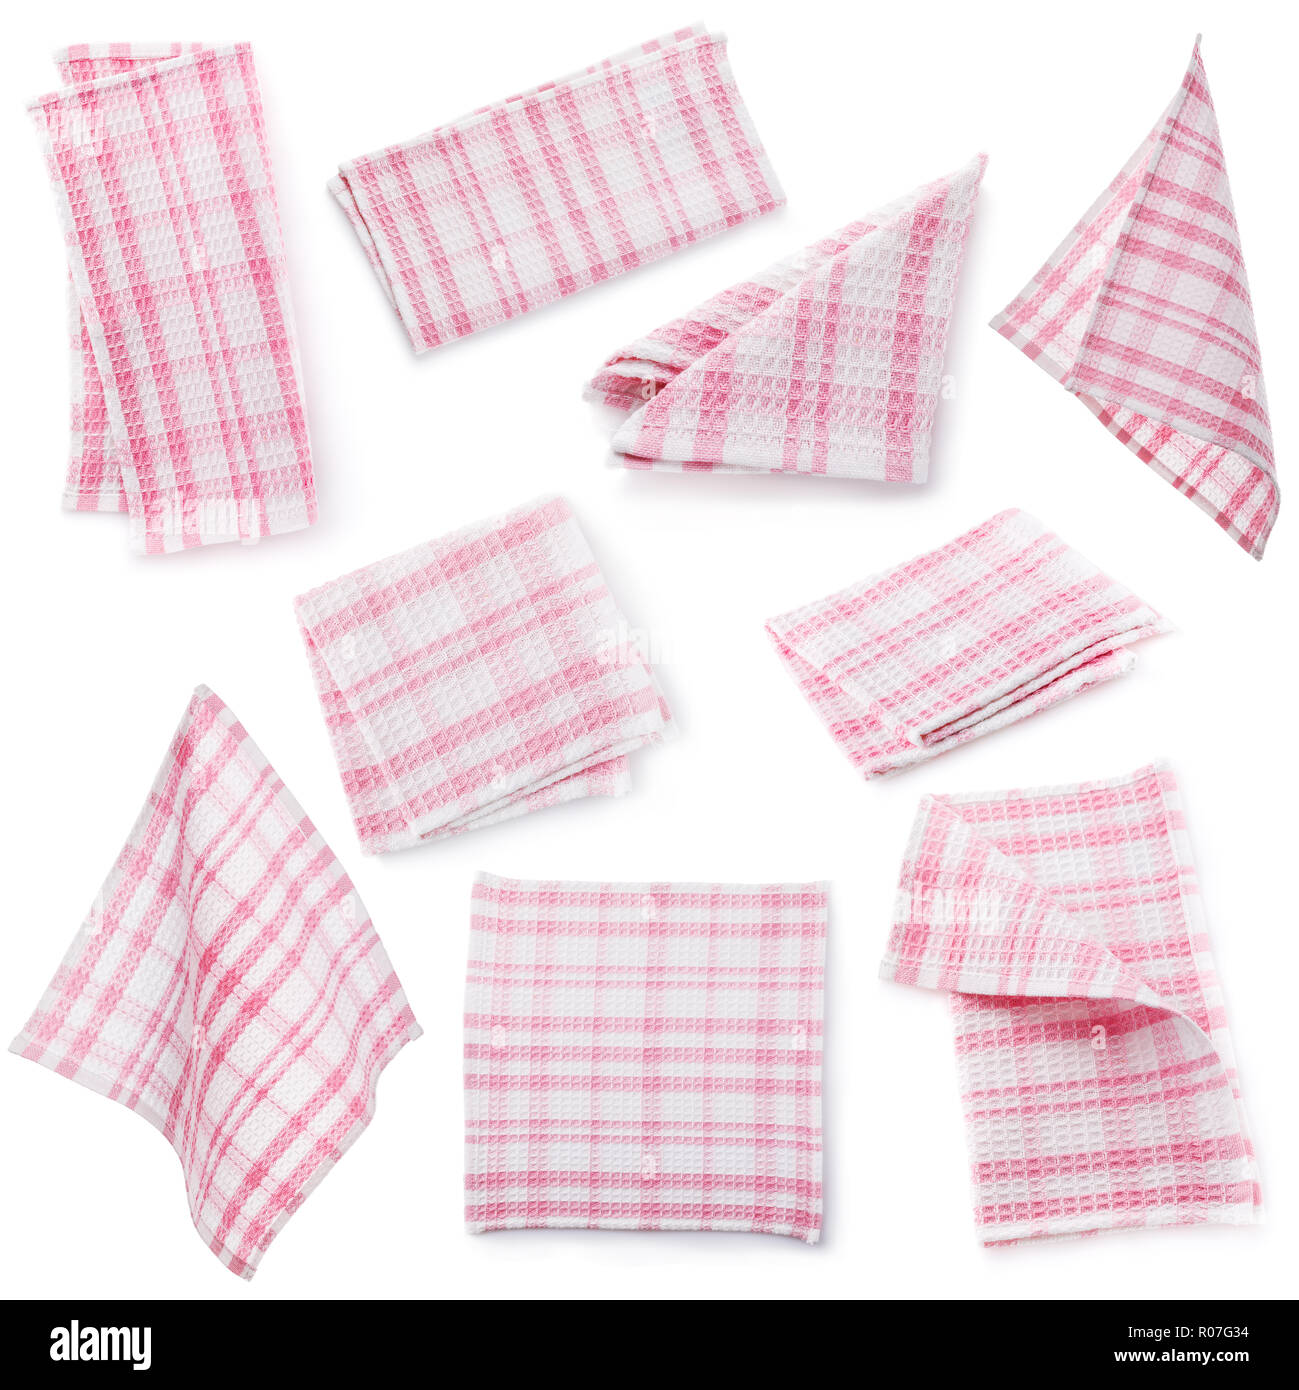 Set of various napkins of pink color, isolated on white background Stock Photo